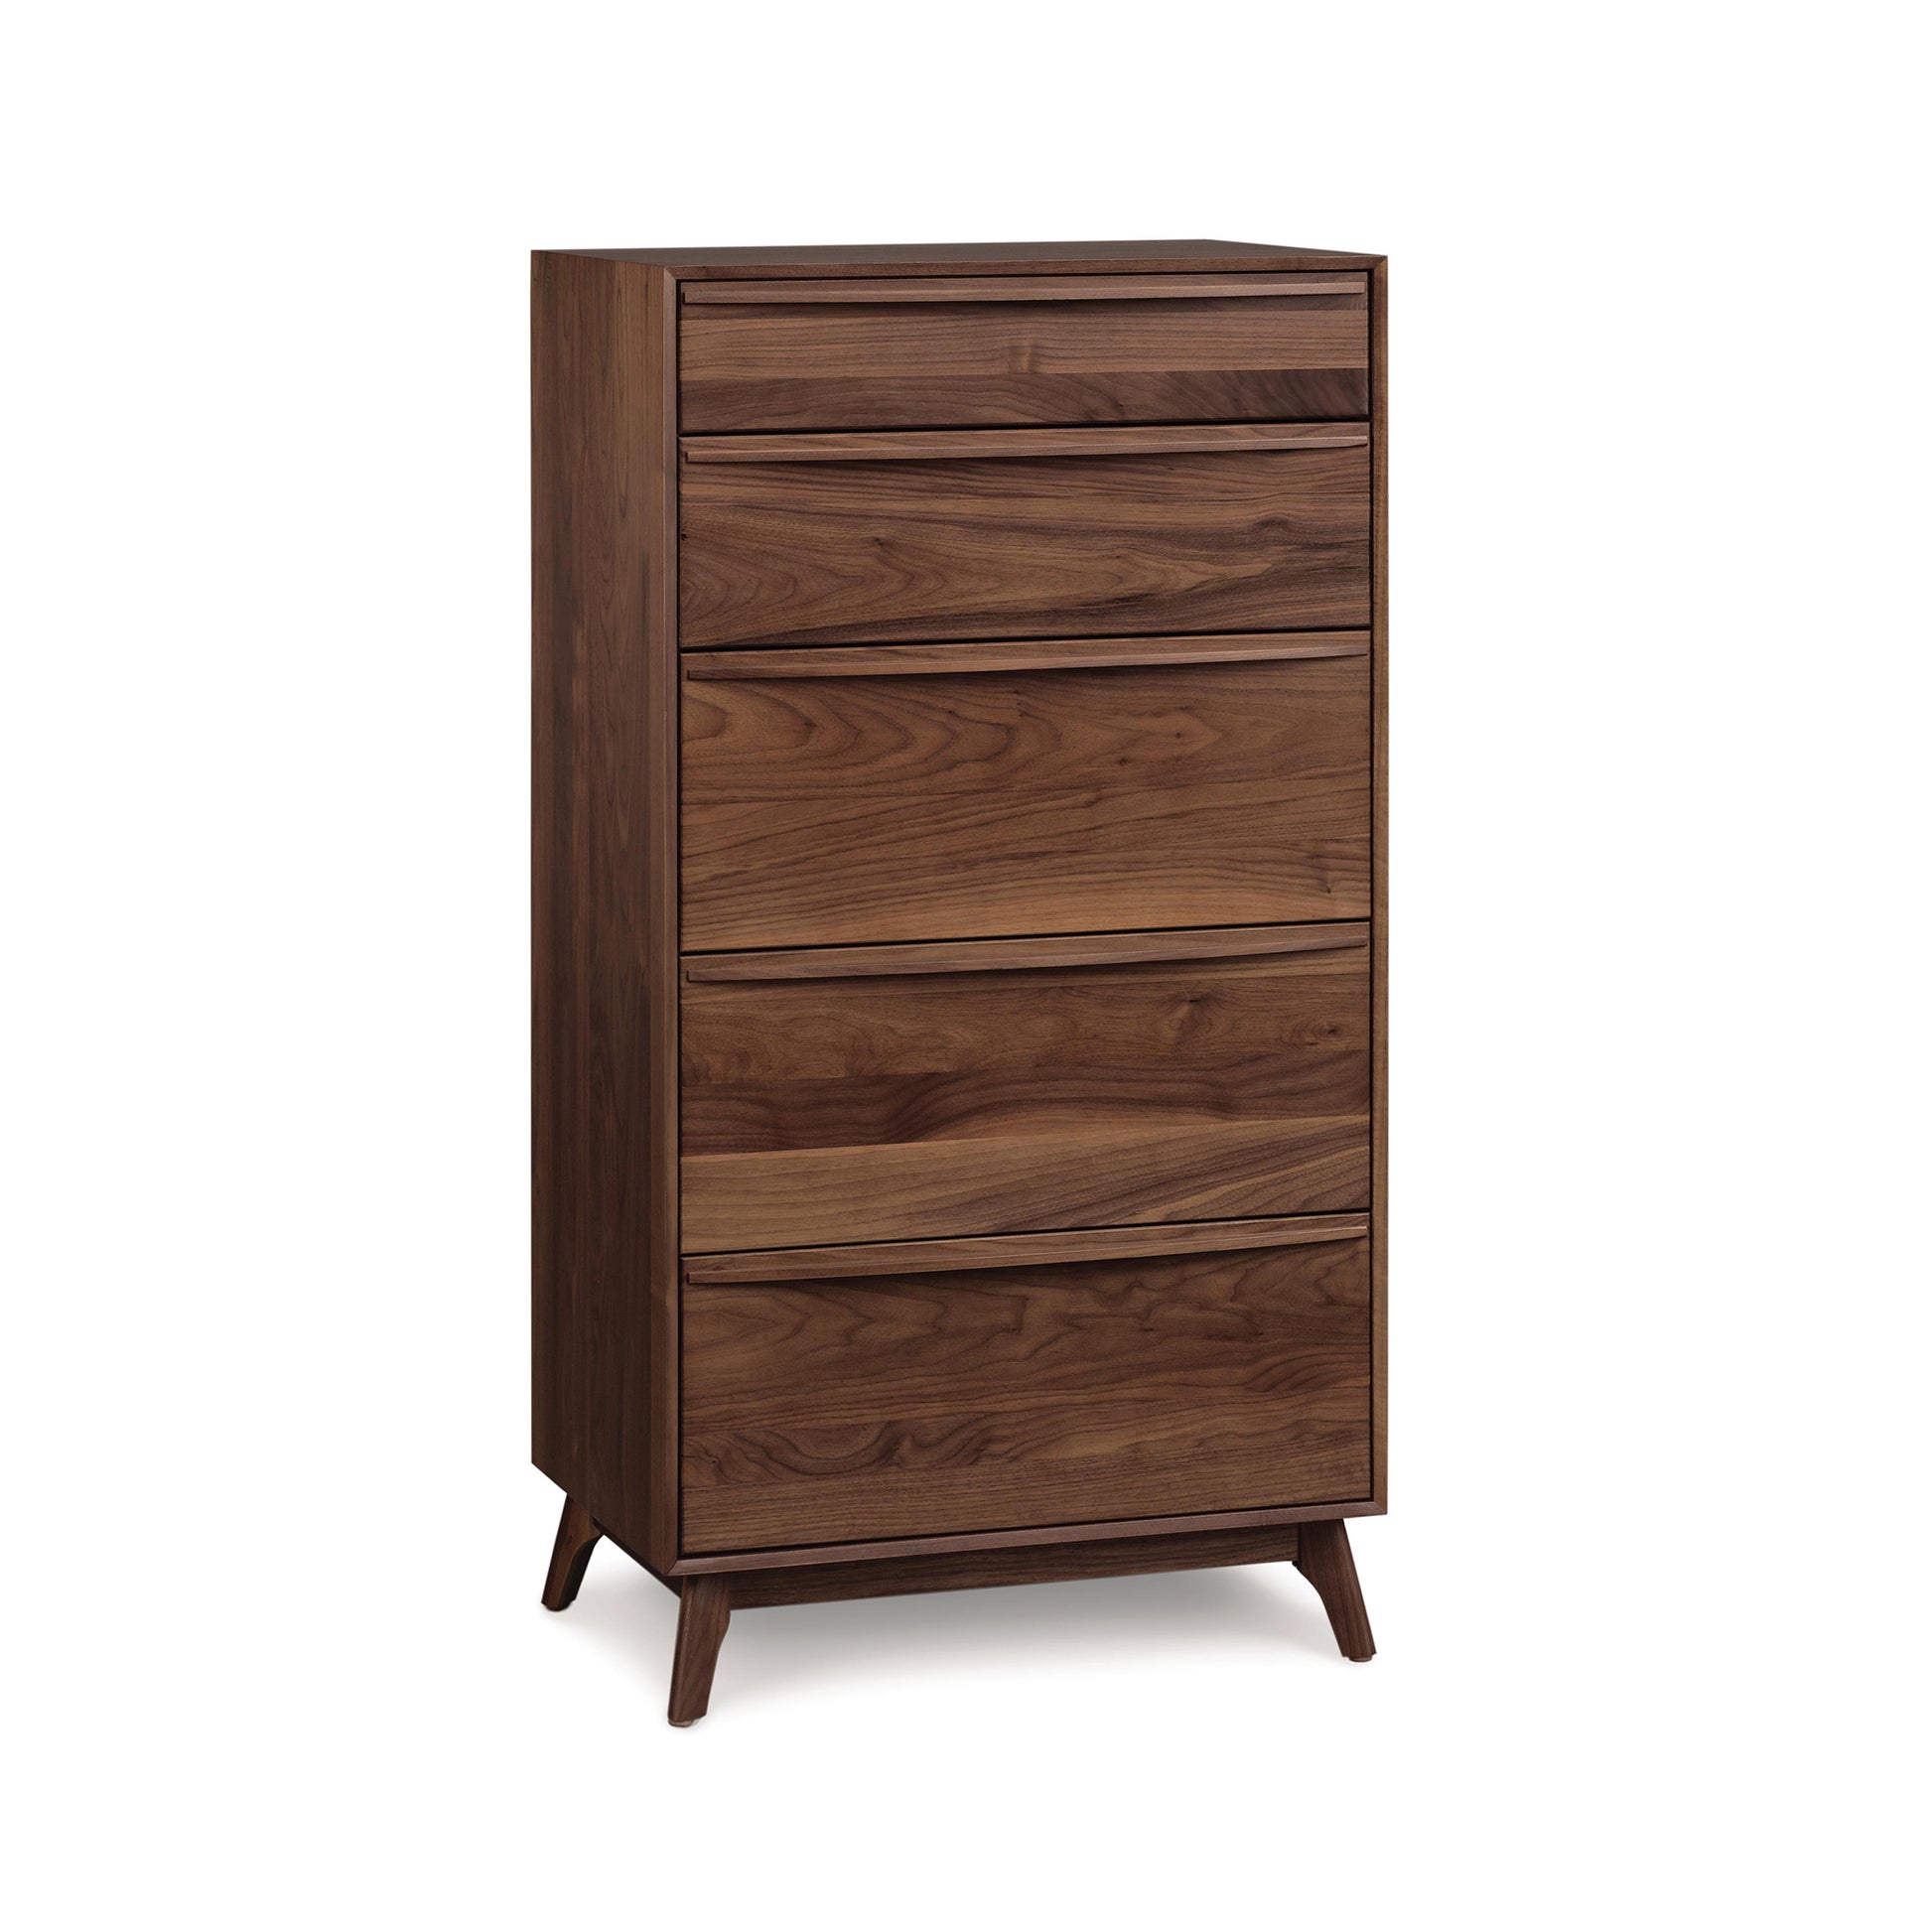 The Copeland Furniture Catalina 5-Drawer Chest, a sleek and modern bedroom furniture piece, features a stunning walnut finish and solid wood construction.